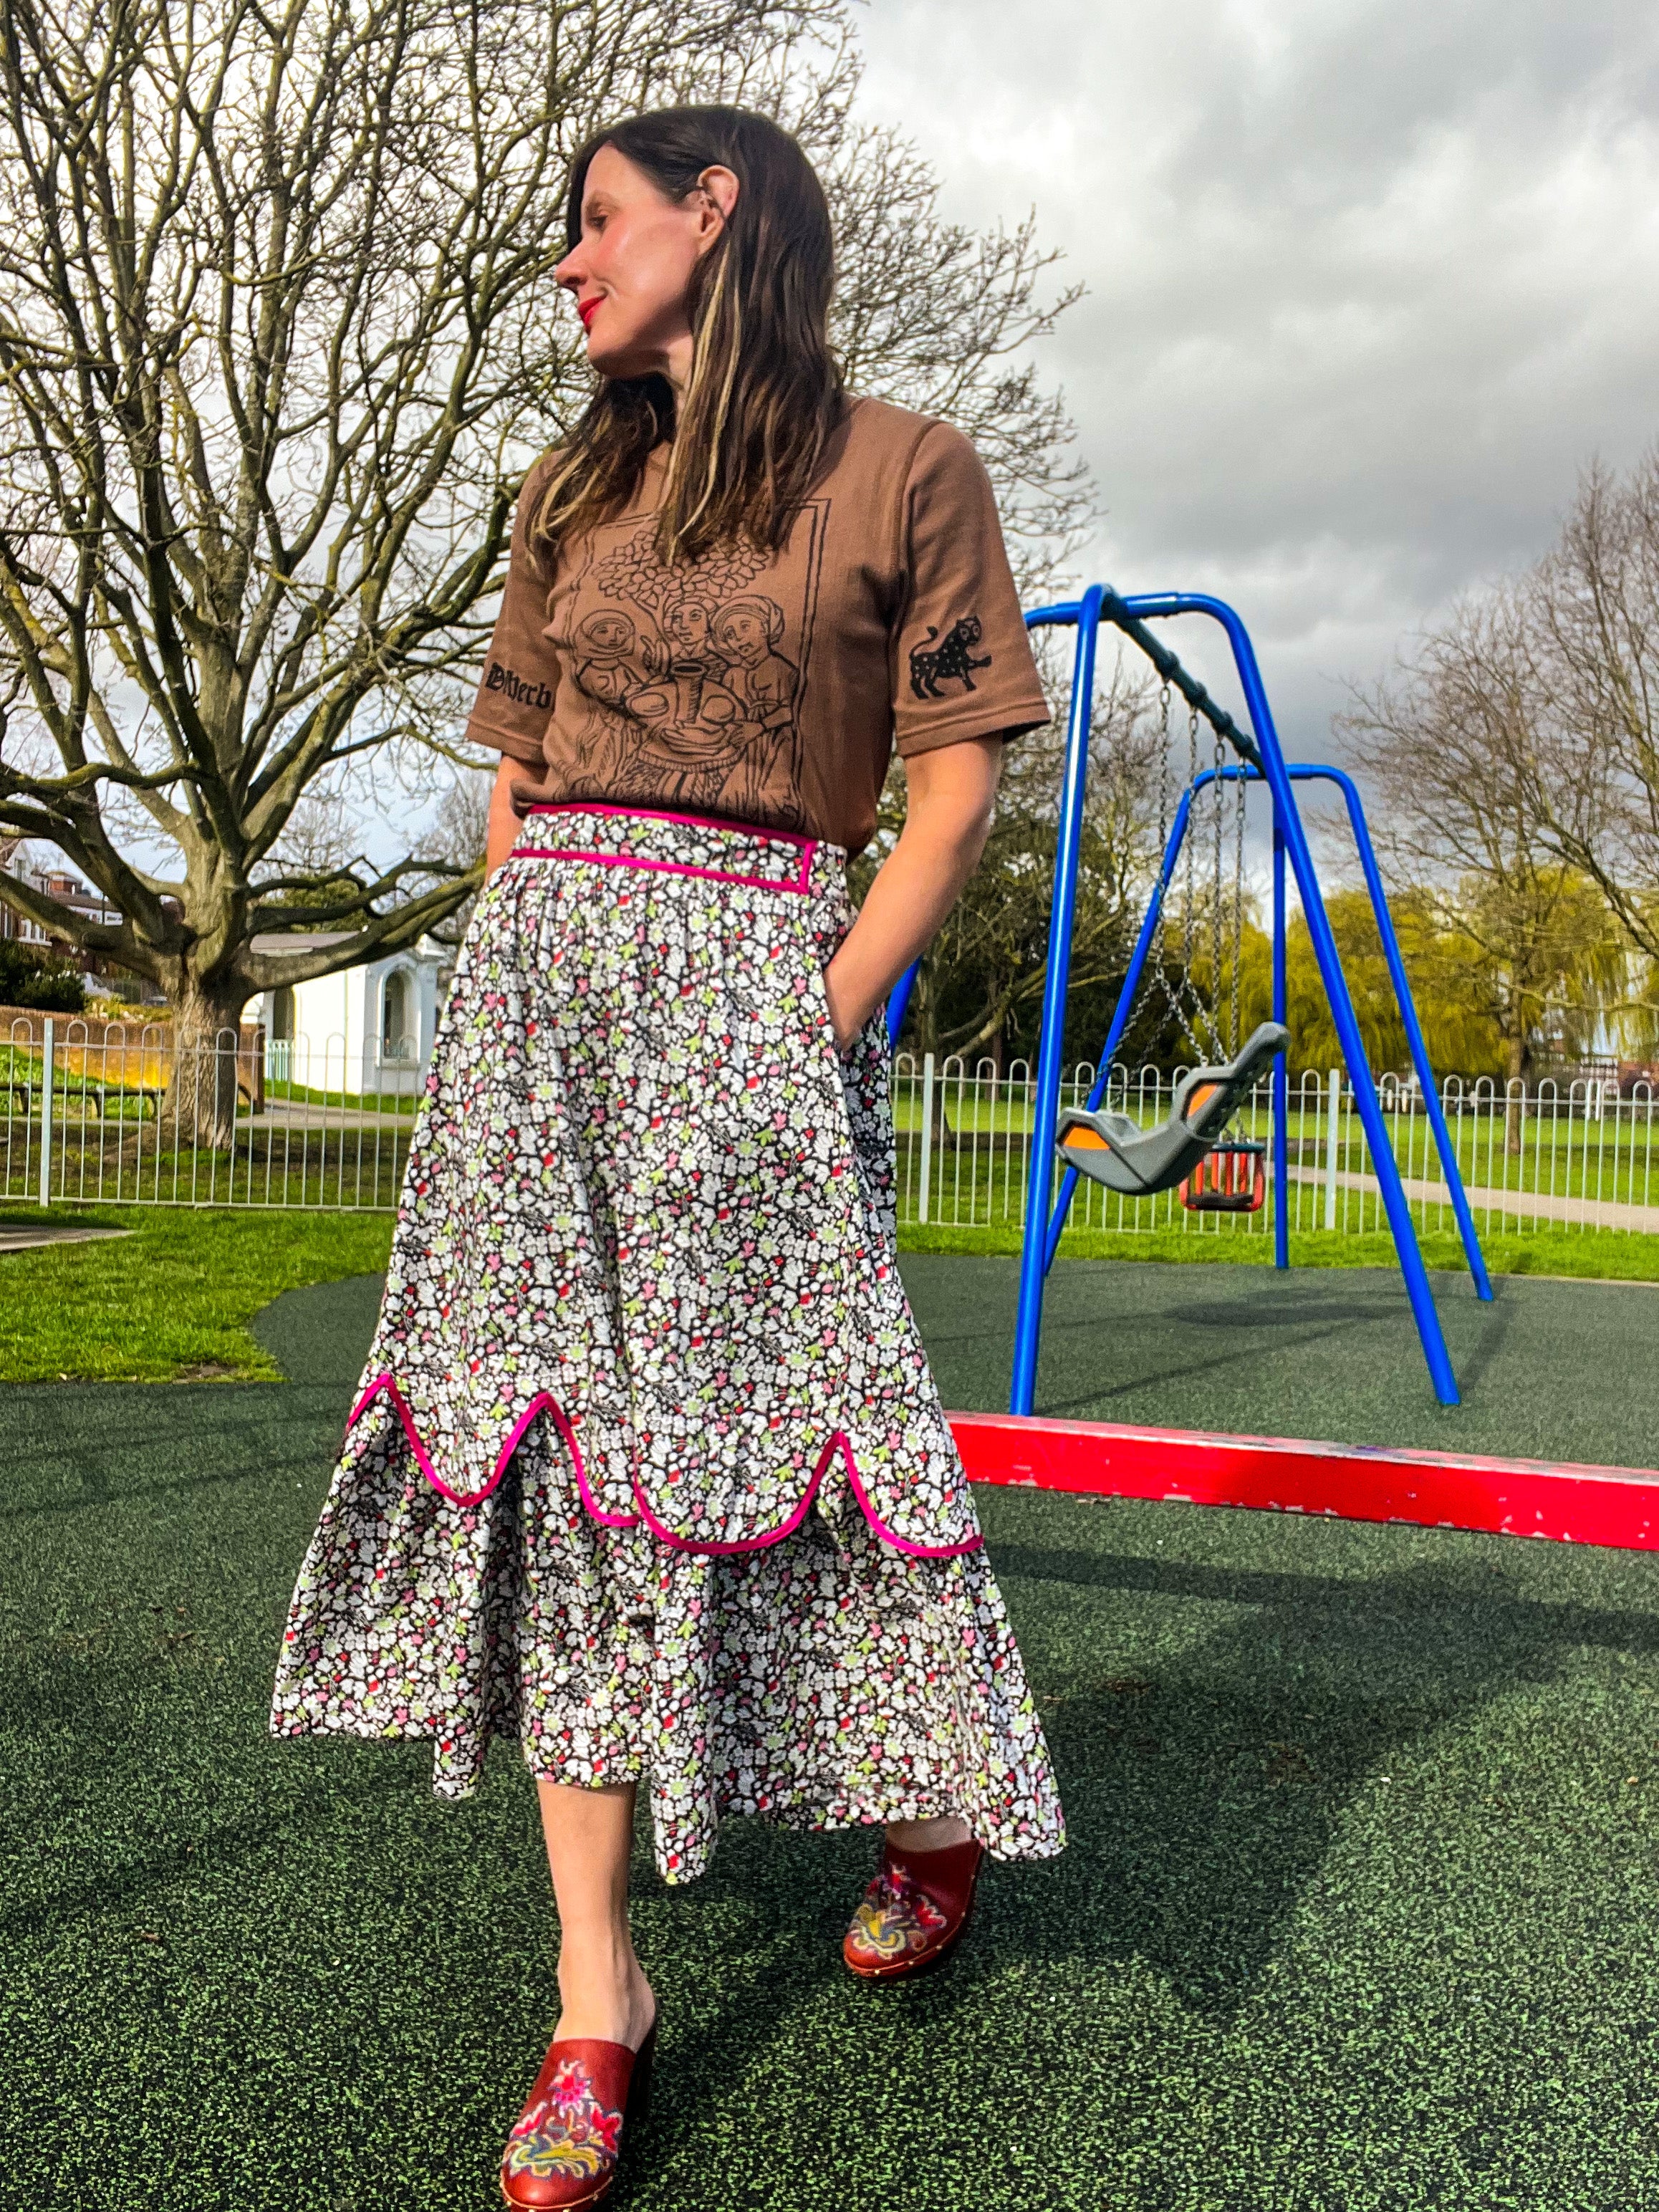 The 'Cosmos' Skirt